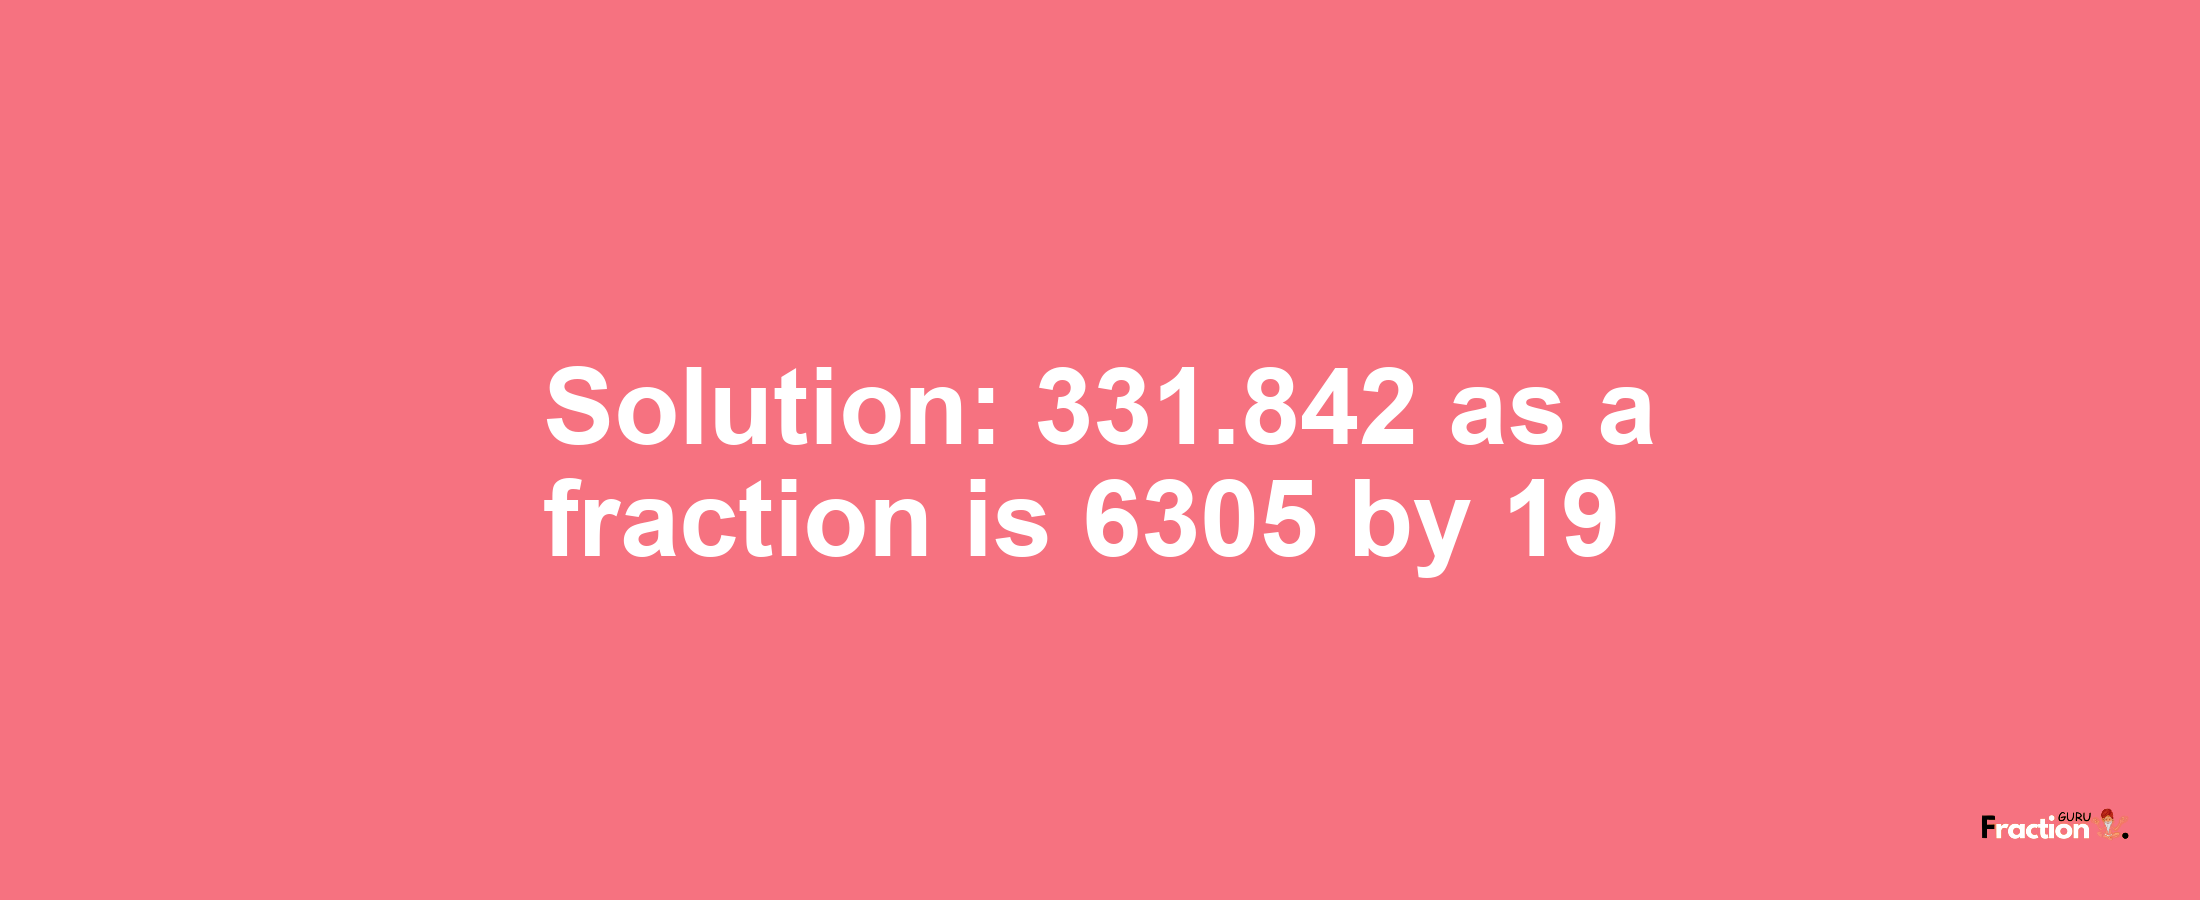 Solution:331.842 as a fraction is 6305/19